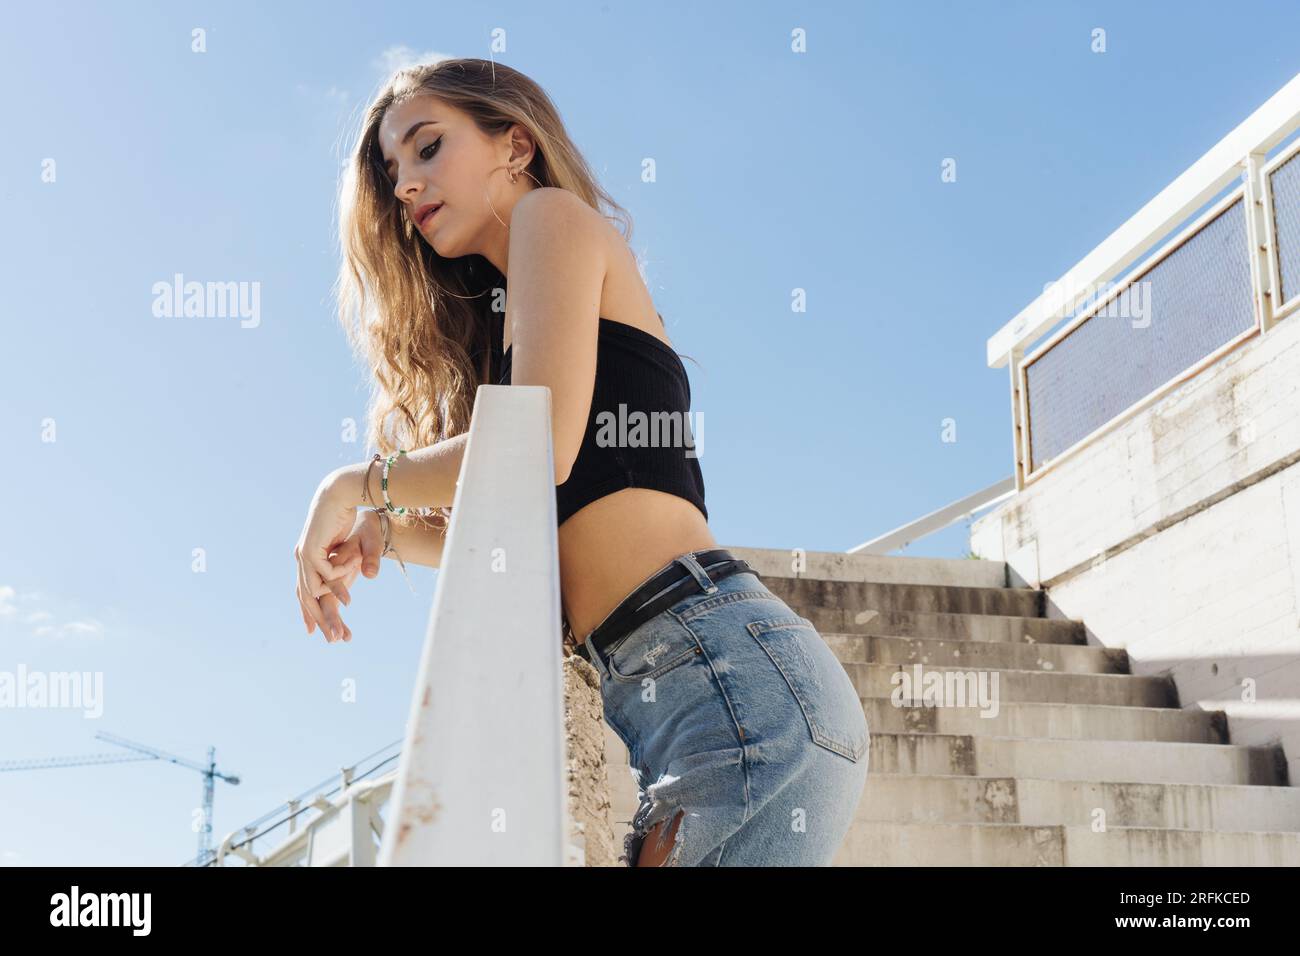 Stylish Girl Sightseeing On A Sunny Day In The City Stock Photo